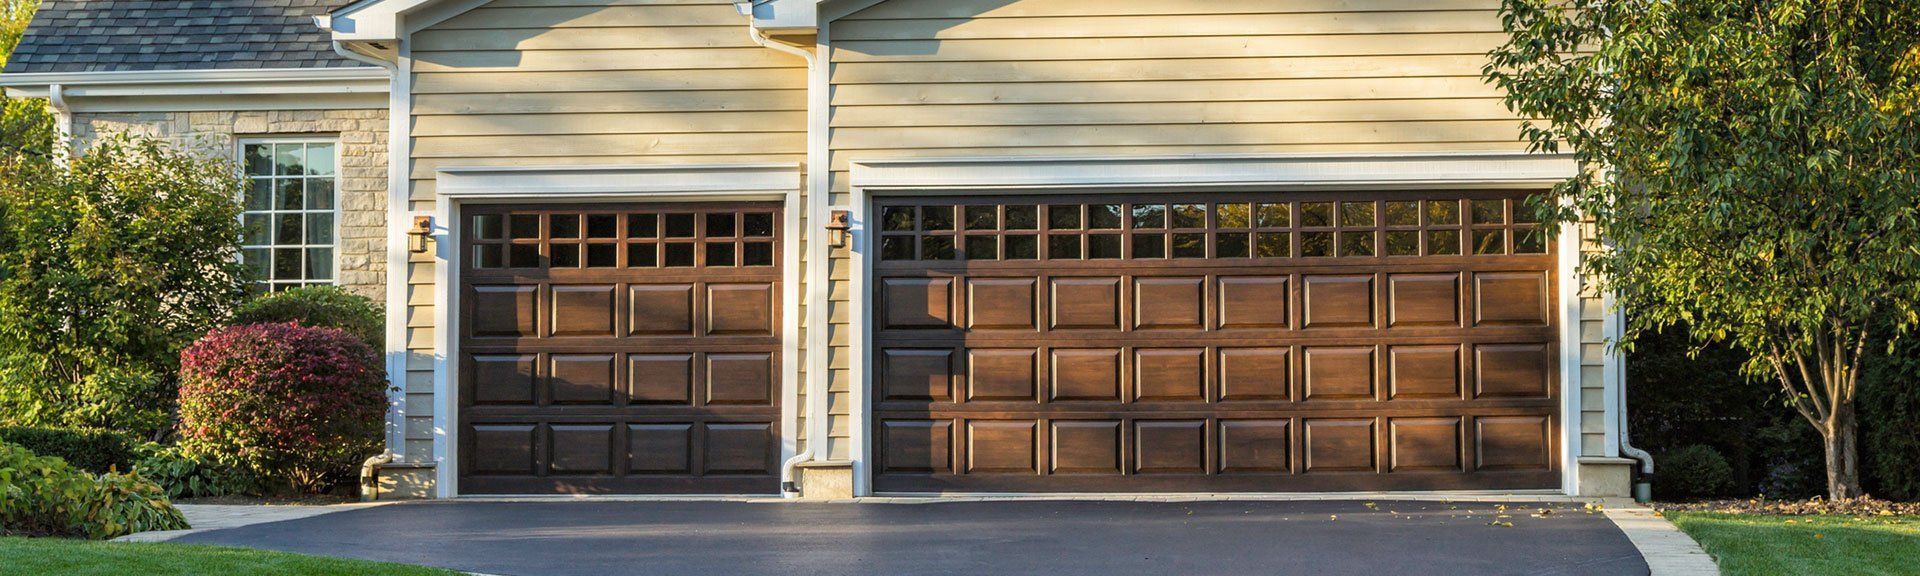 Garage Door Services Being Provided in Oswego, IL